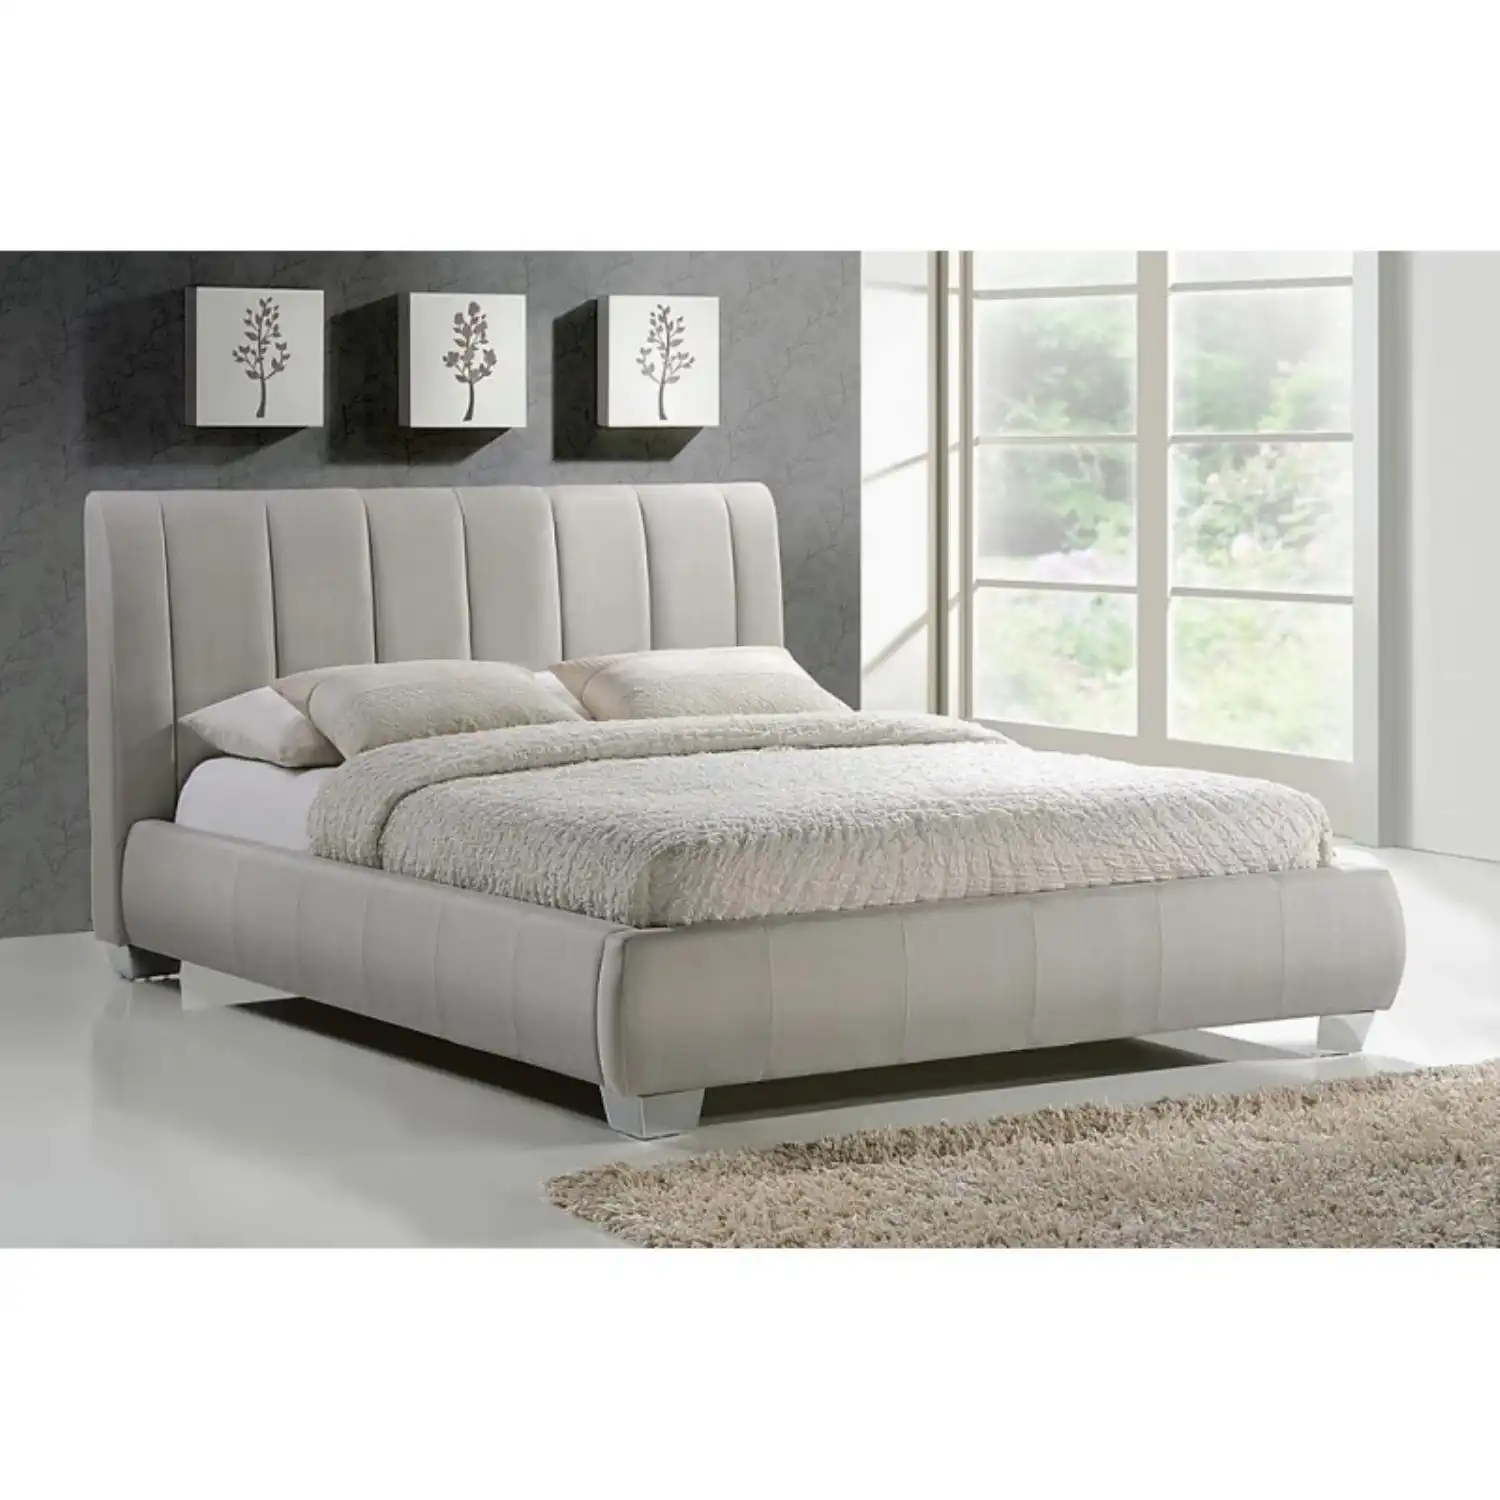 Broughton Sand or Grey Fabric Beds